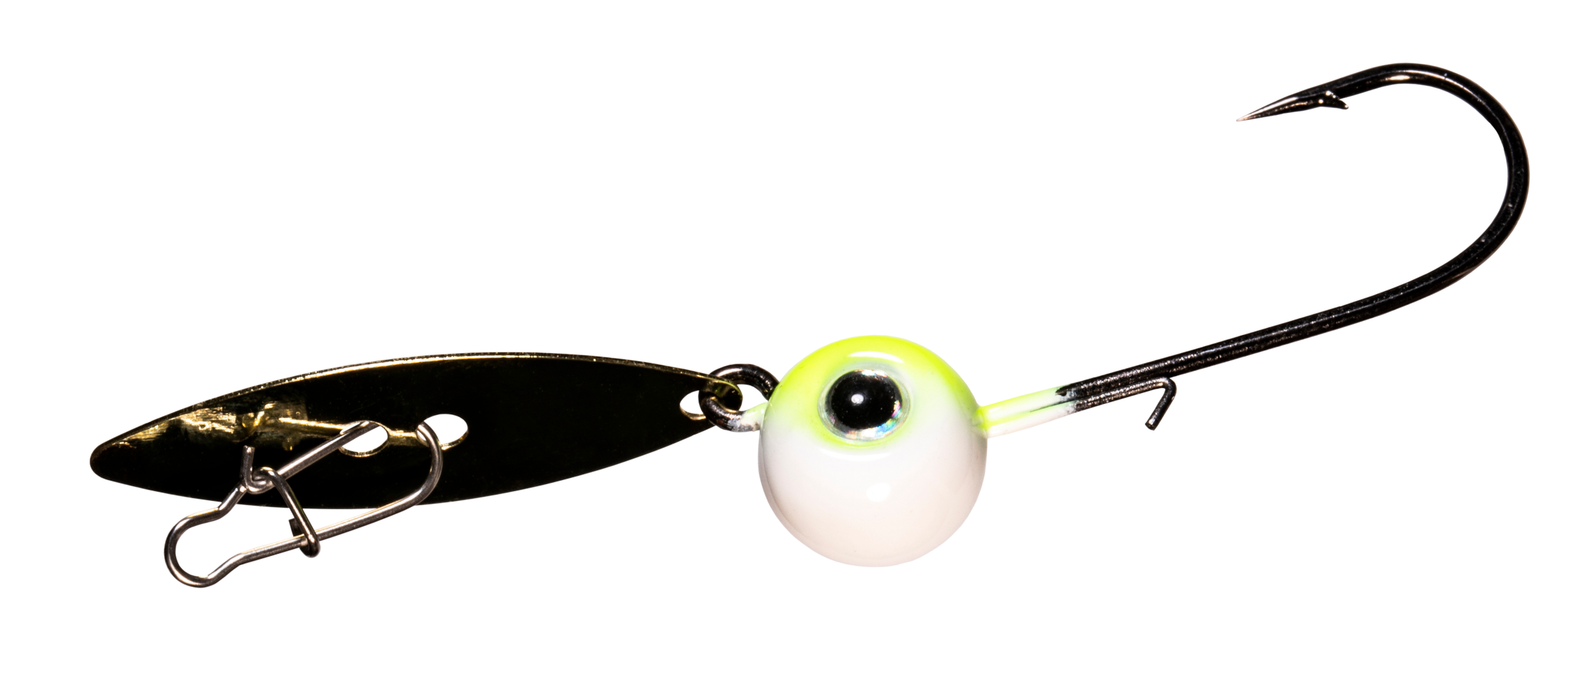 Z-Man CBWV14-04PK2 Chatterbait Willowvibe 1/4 oz Chartreuse Shad 2